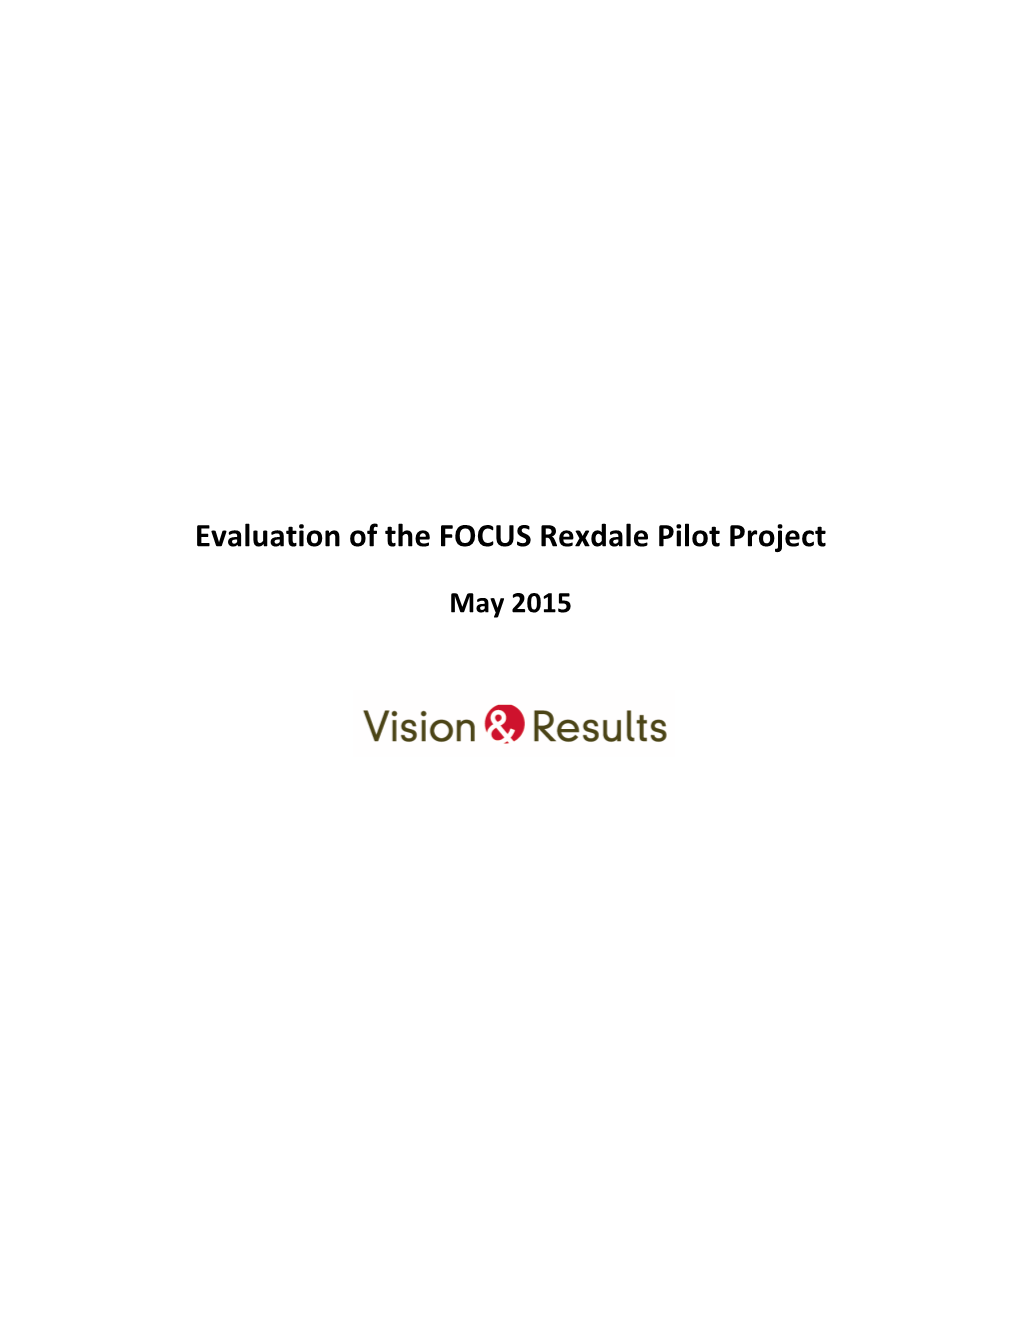 Evaluation of the FOCUS Rexdale Pilot Project